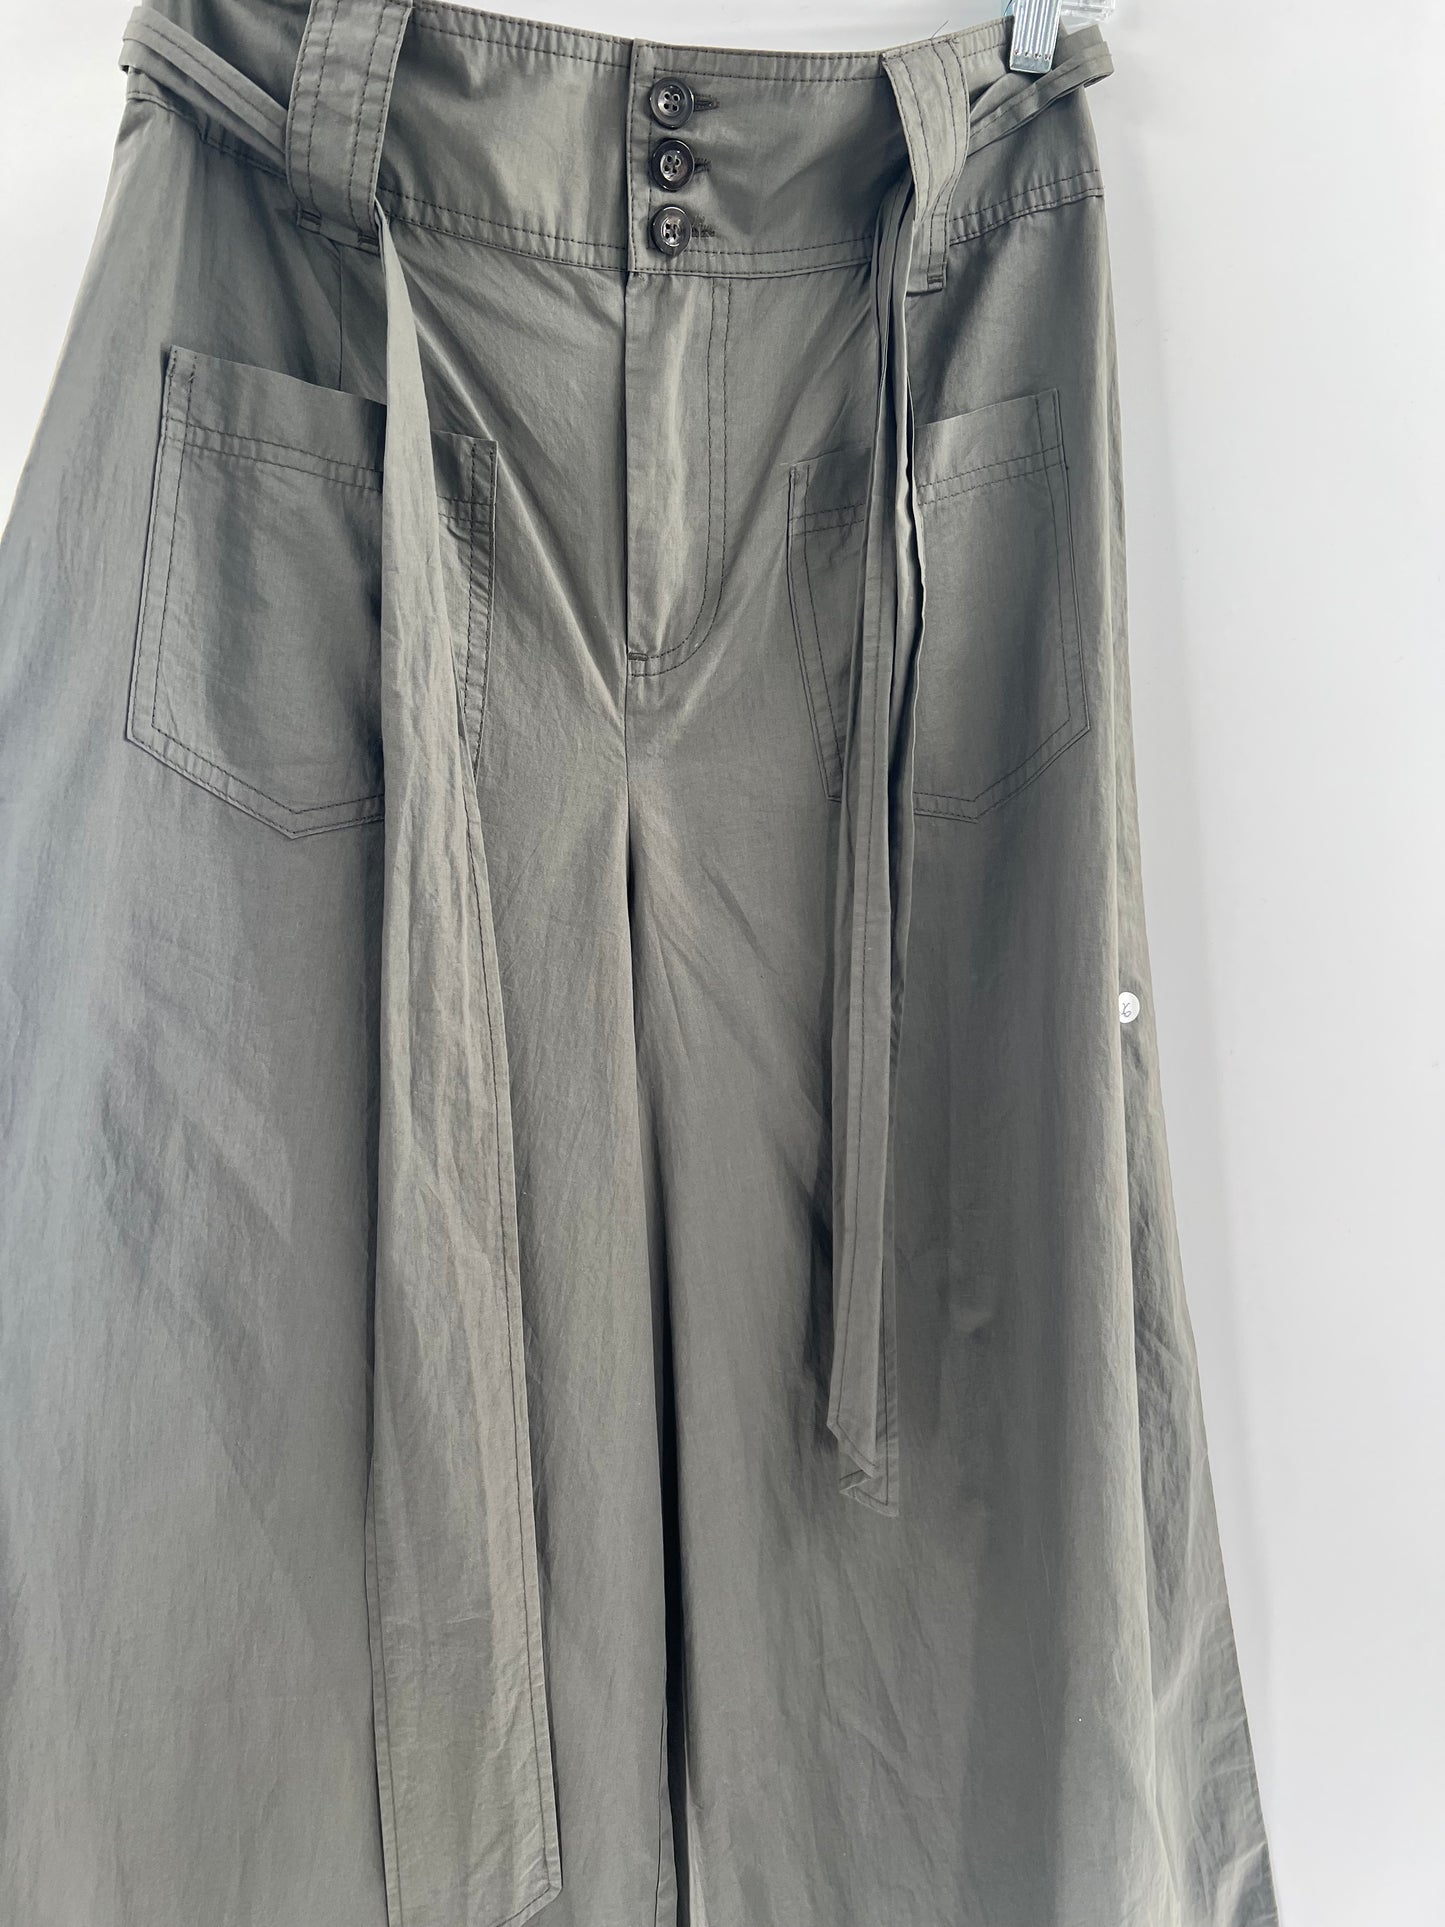 Free People Olive Flare Pants with Belt (Size 26)